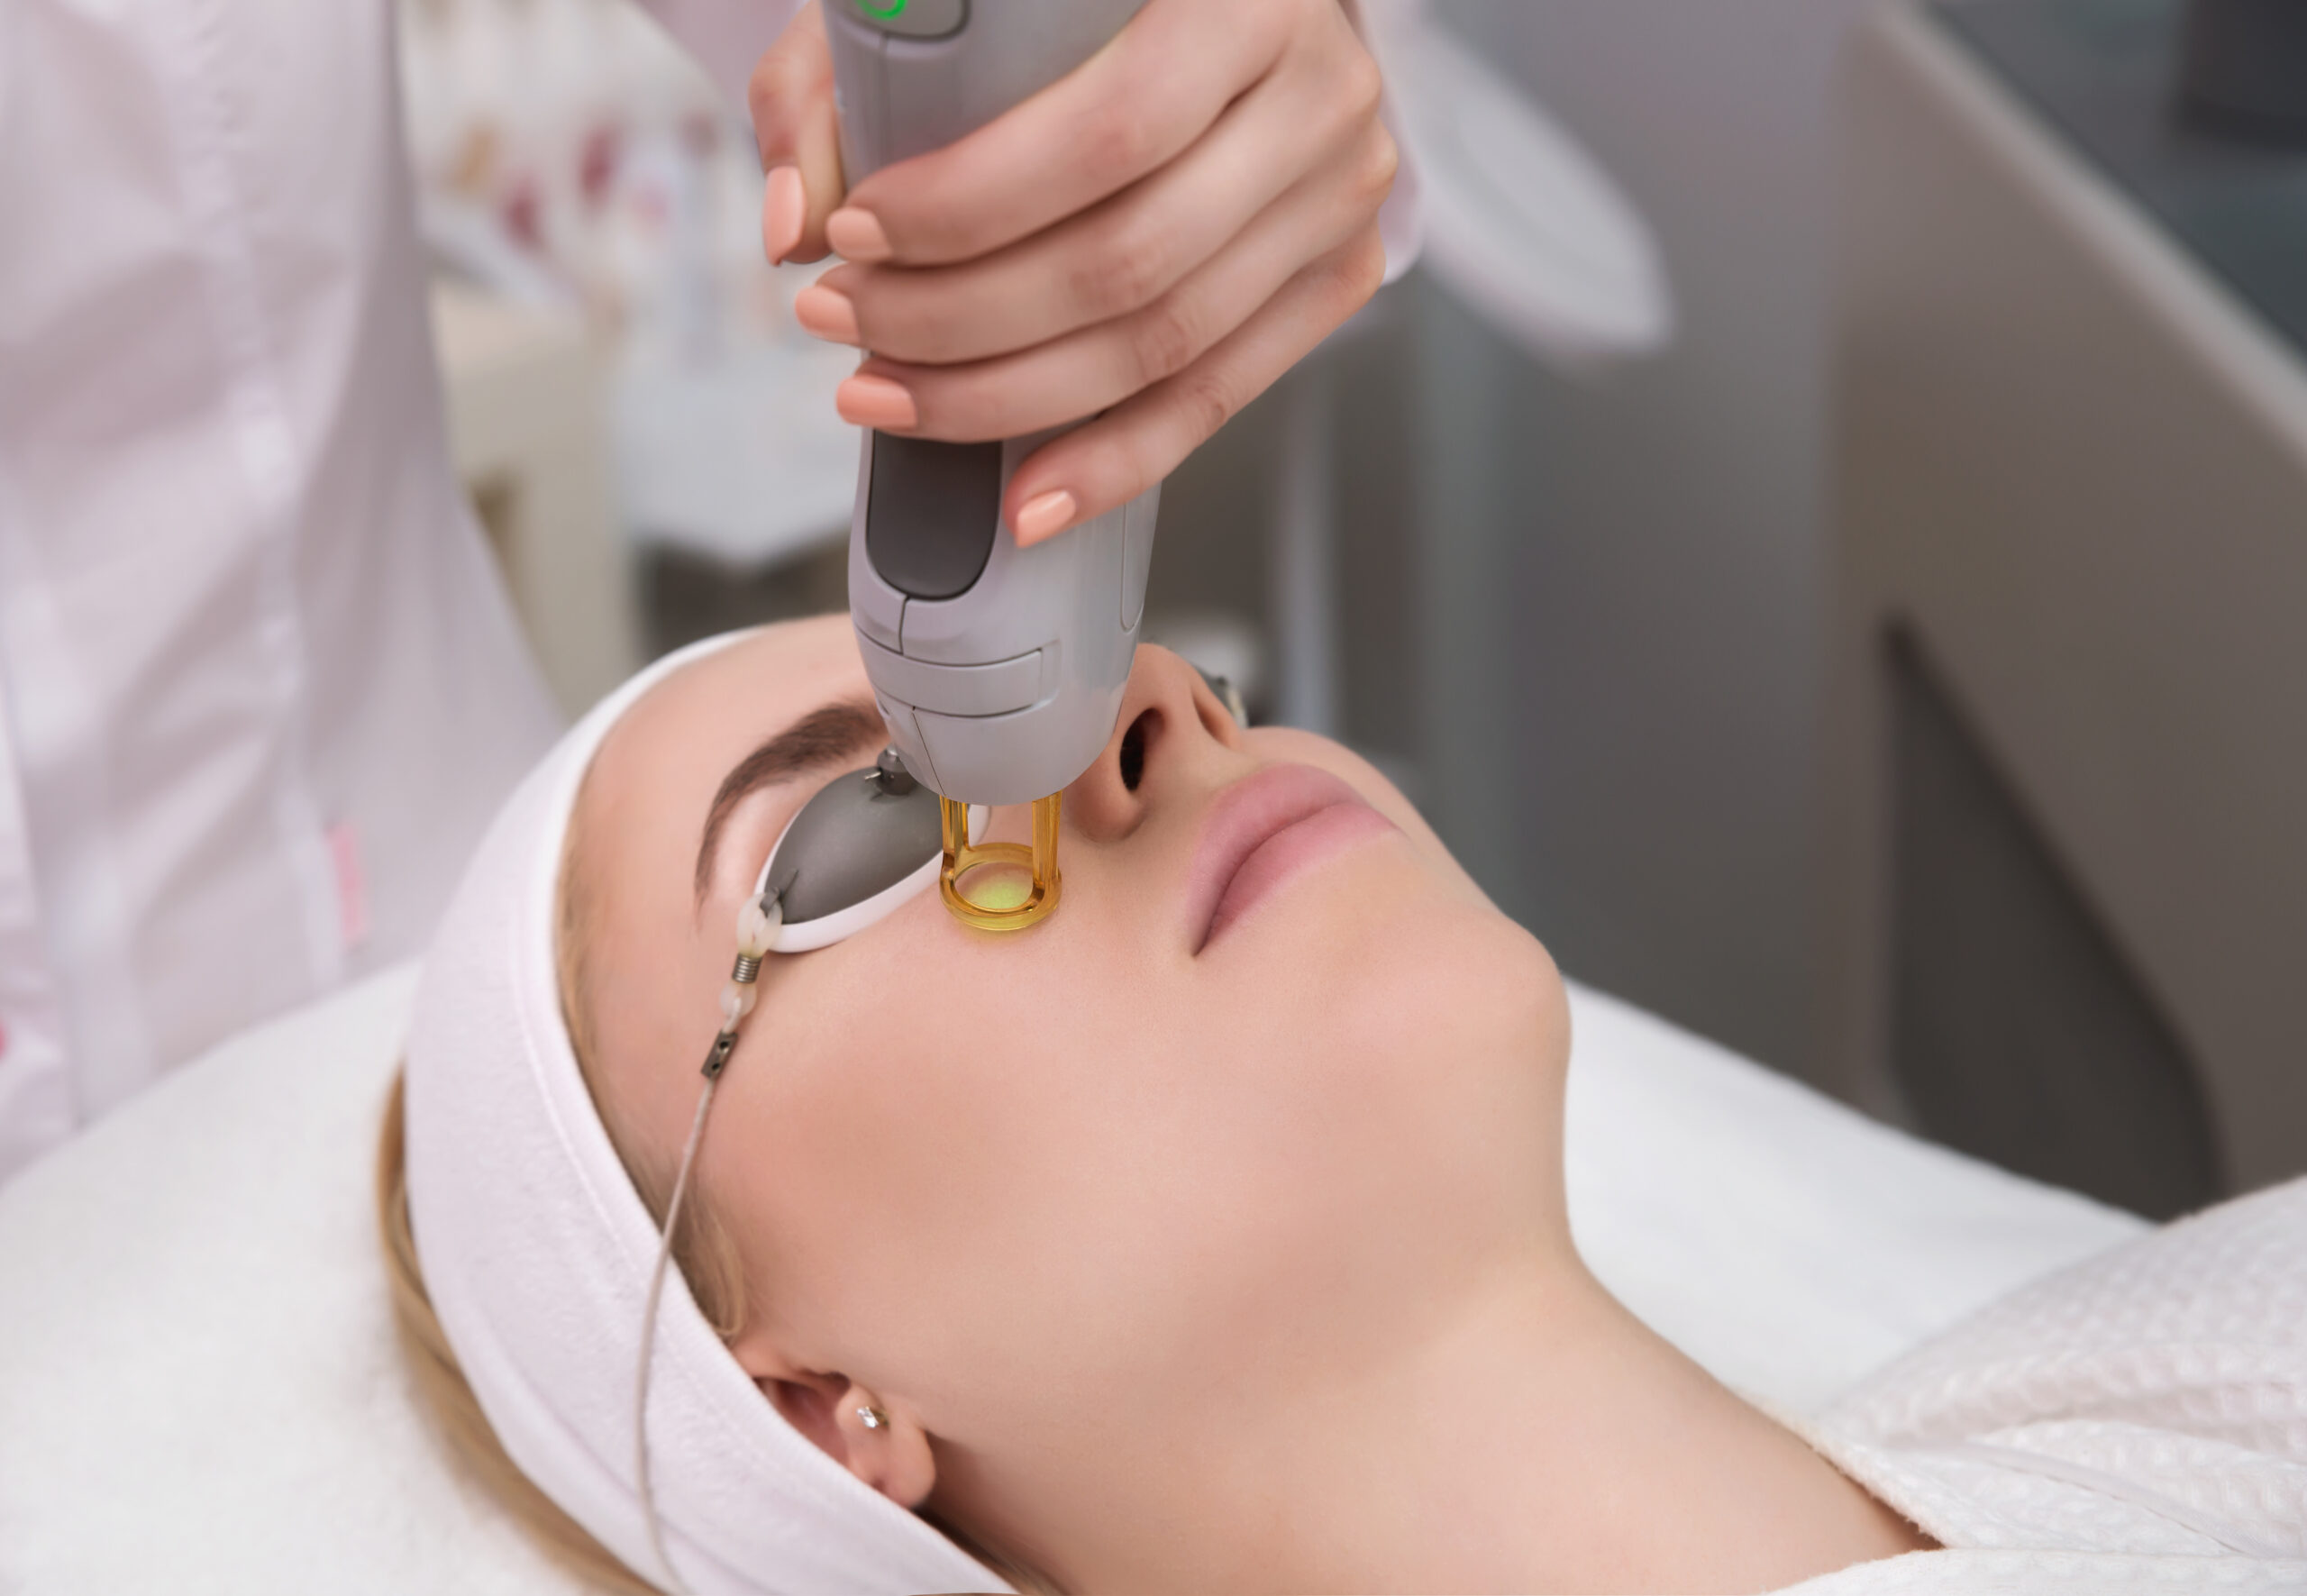 Photorejuvenation treatments for acne with vascular laser